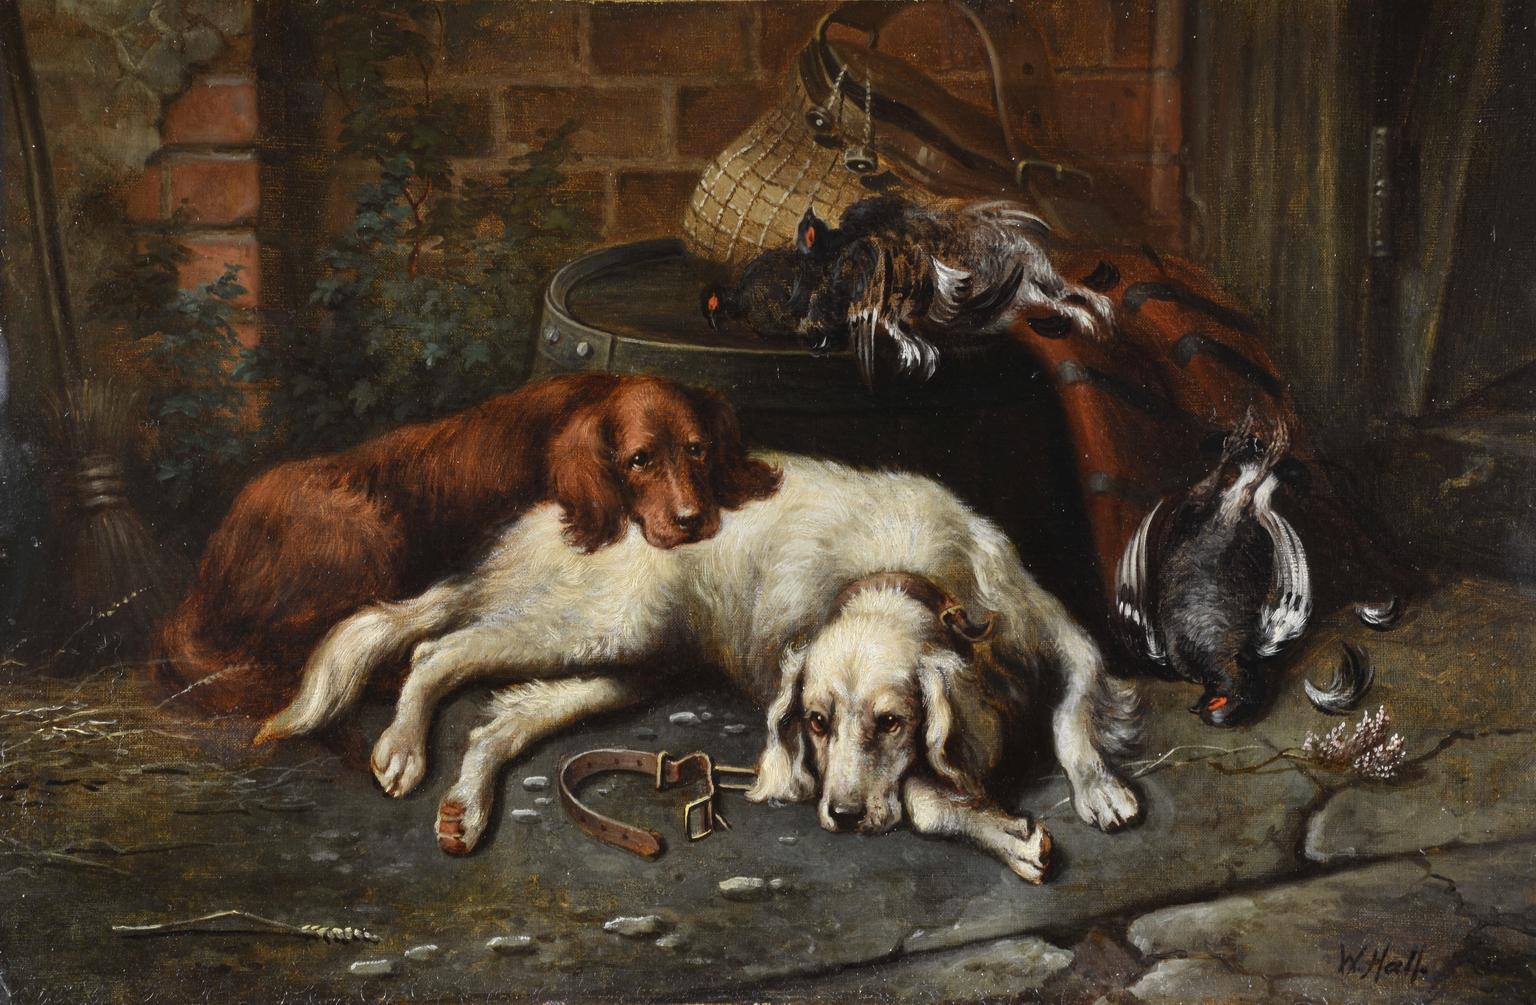 William Hall Animal Painting - "After the Shoot"